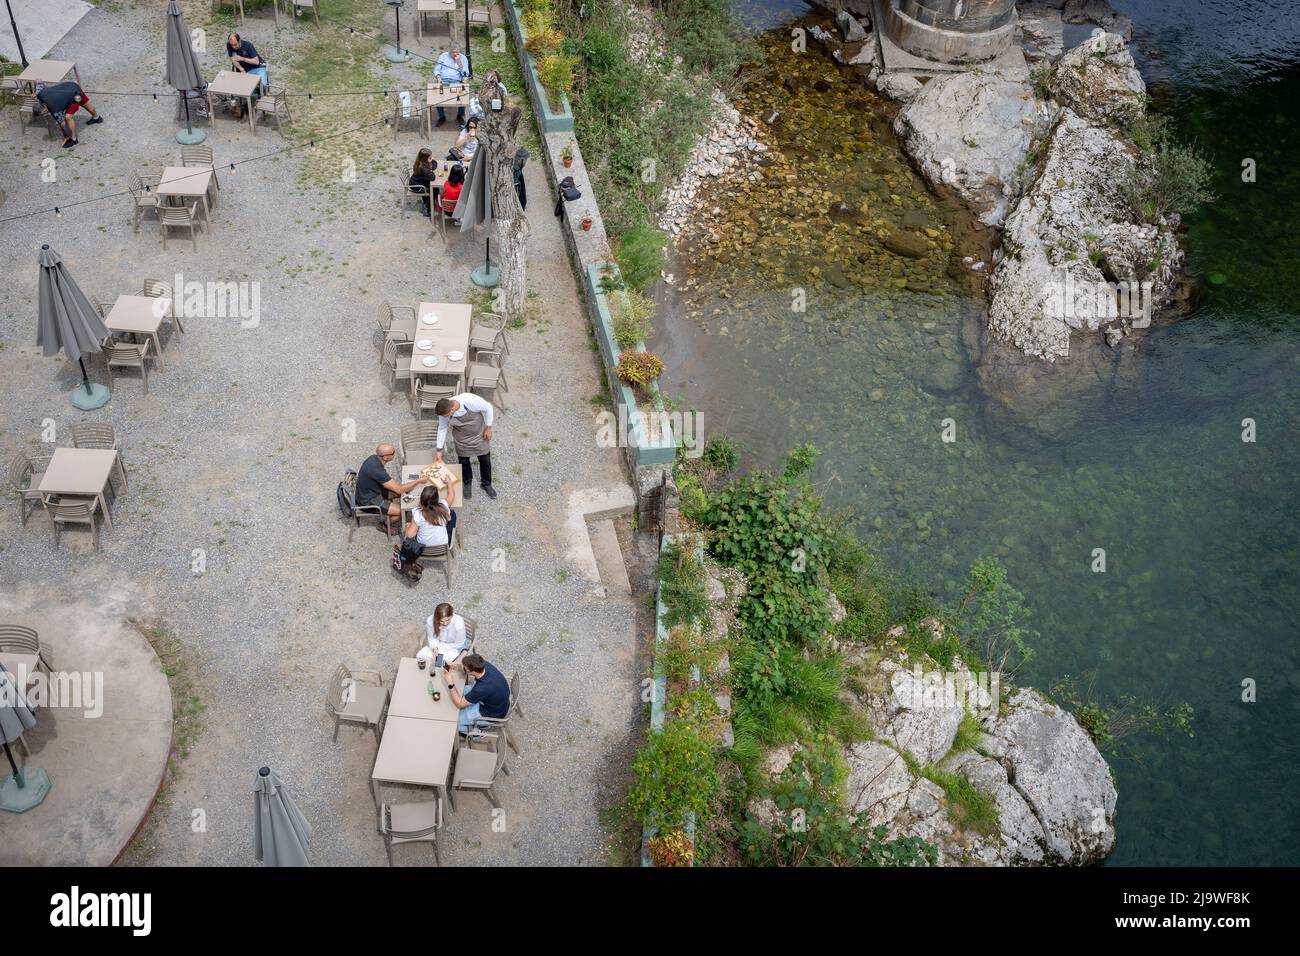 A waiter offers snacks to customers at a river Sella cafe in the Picos Mountain range, on 14th May 2022, in Congas de Onis, Picos Mountains, Asturias, Spain. Stock Photo